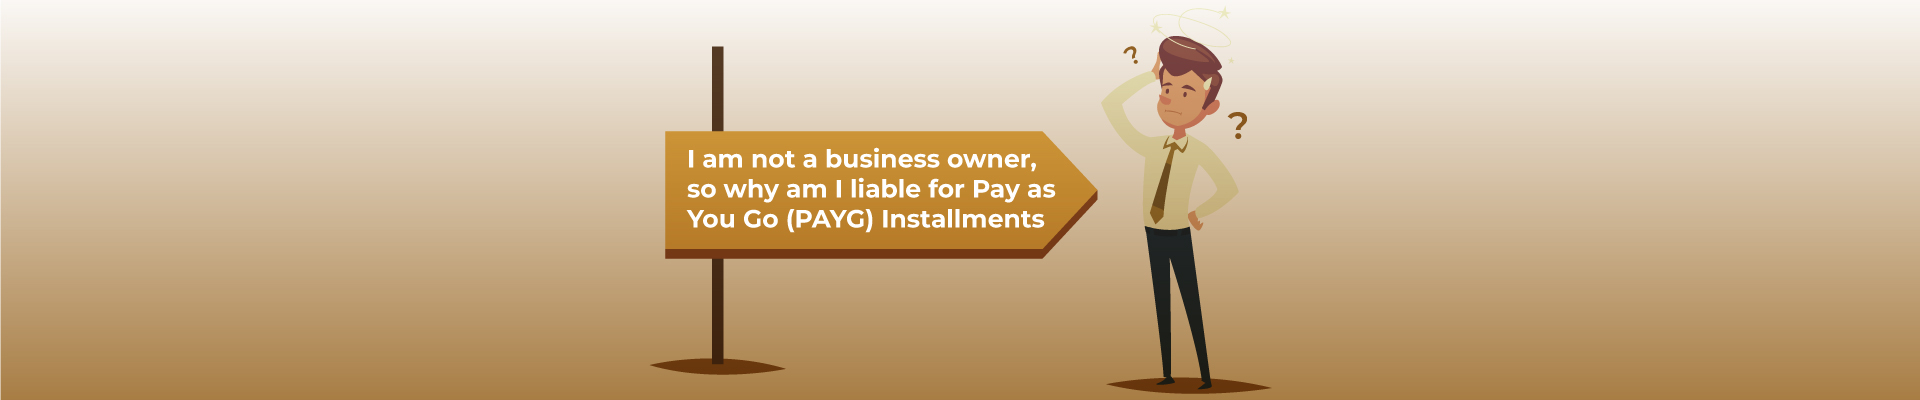 I am not a business owner, so why am I liable for Pay as You Go (PAYG) Instalments?